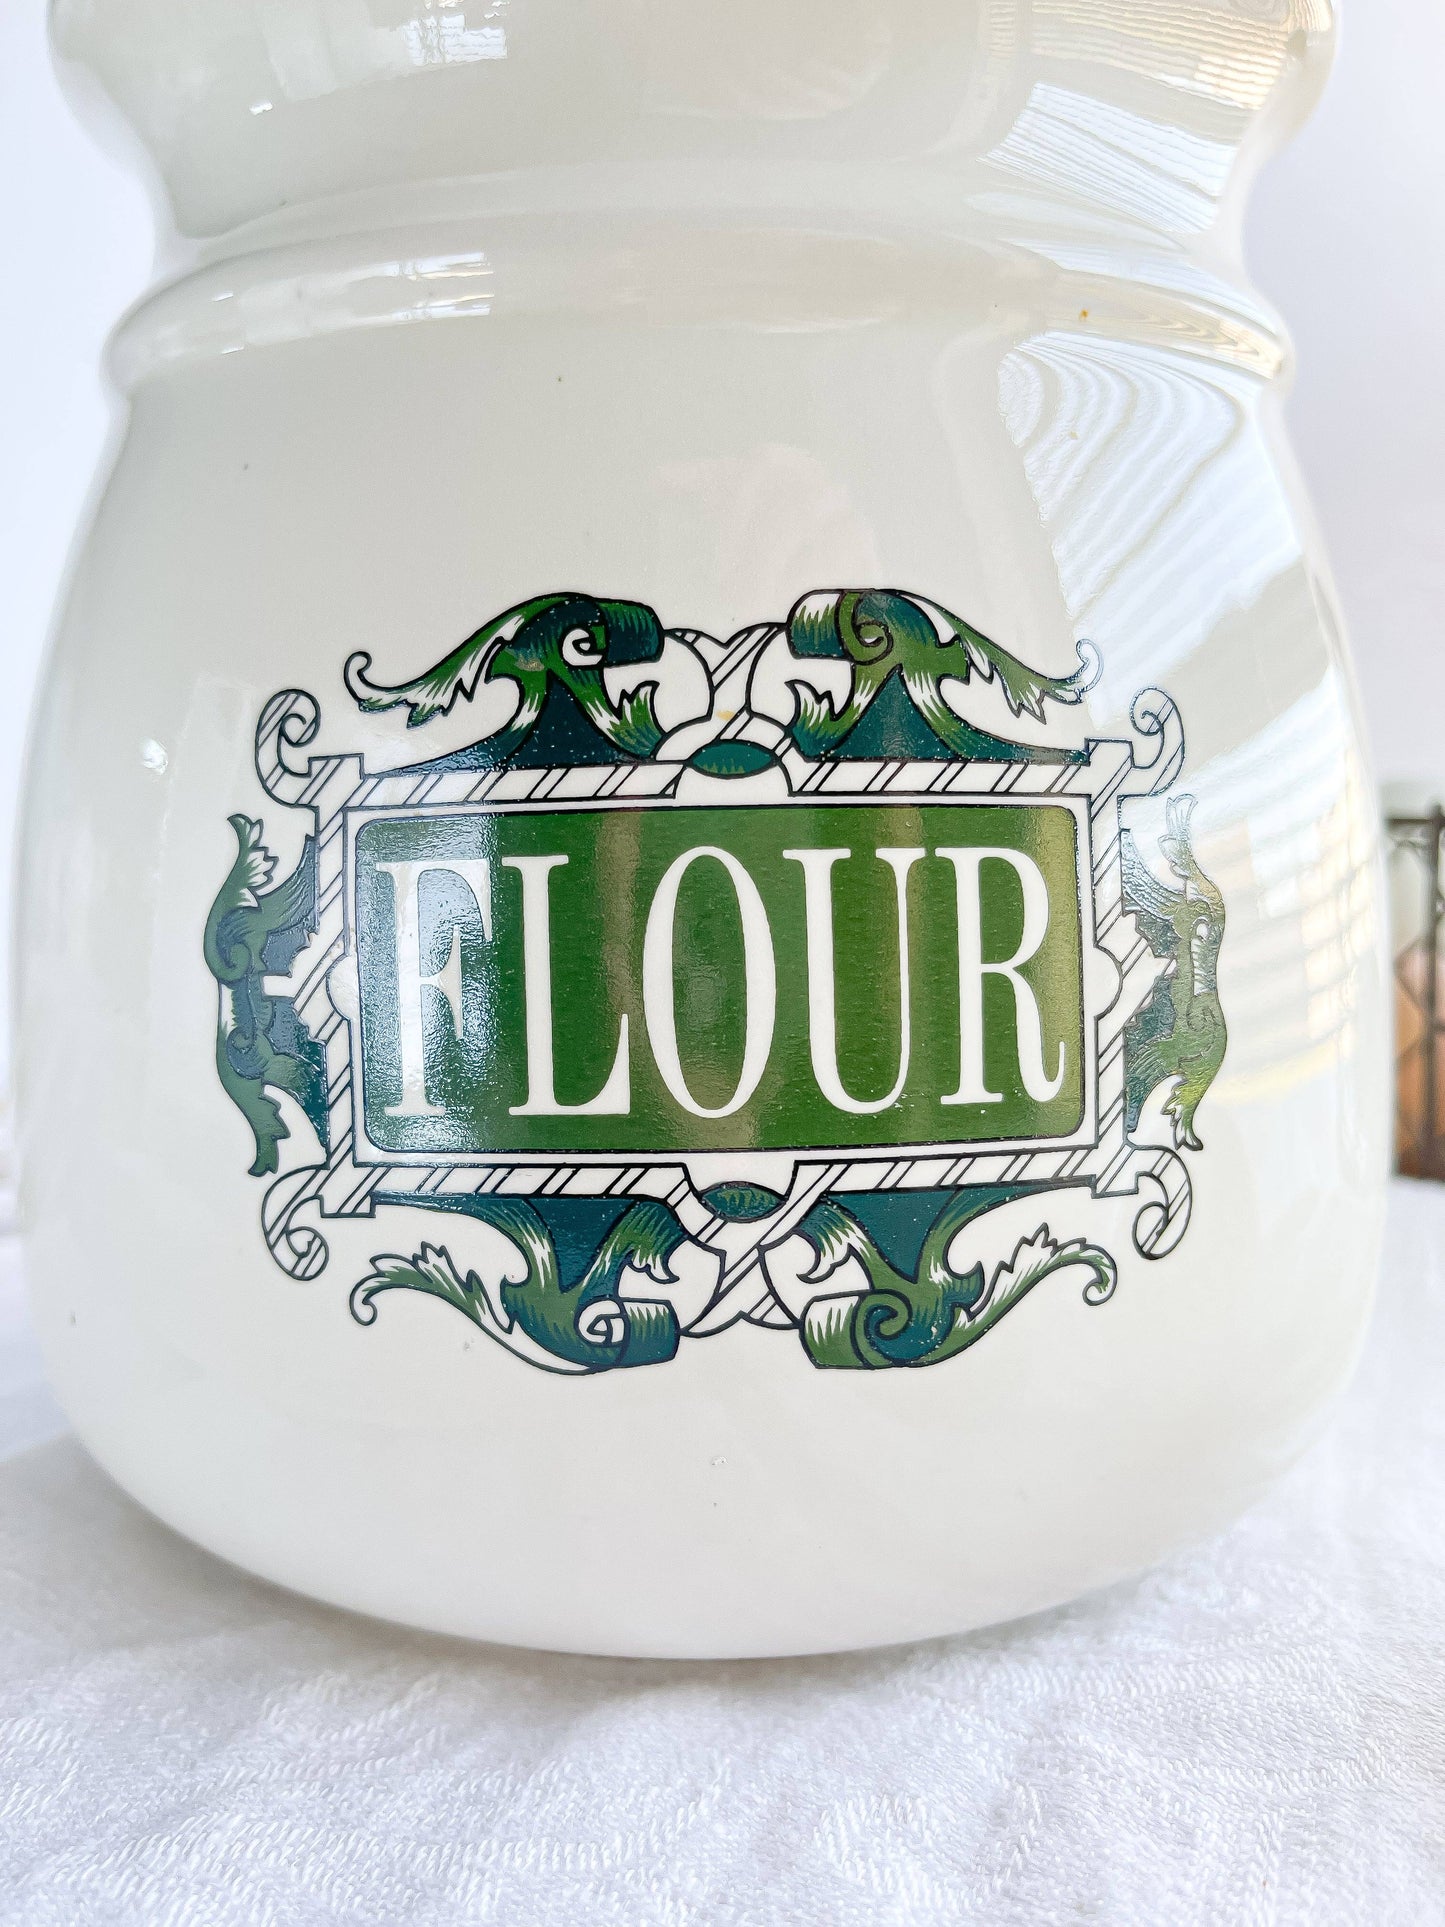 Vintage Ceramic Flour Storage Container with Ornate Label and Wooden Lid - SOSC Home